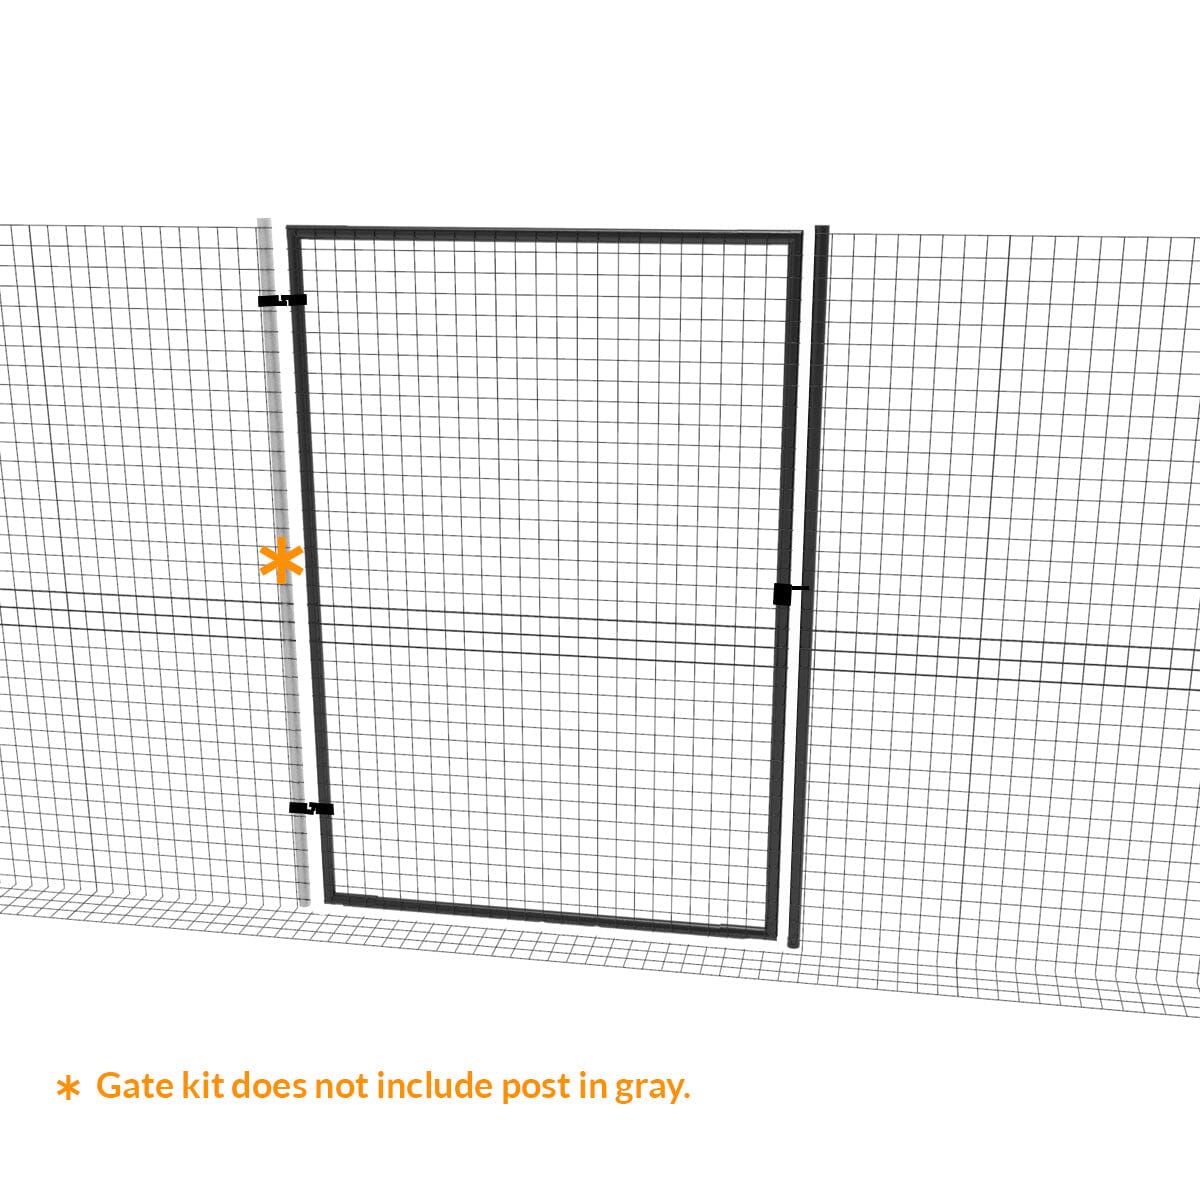 Dog Proofer's freestanding fence with a gate, illustrating entryway integration.